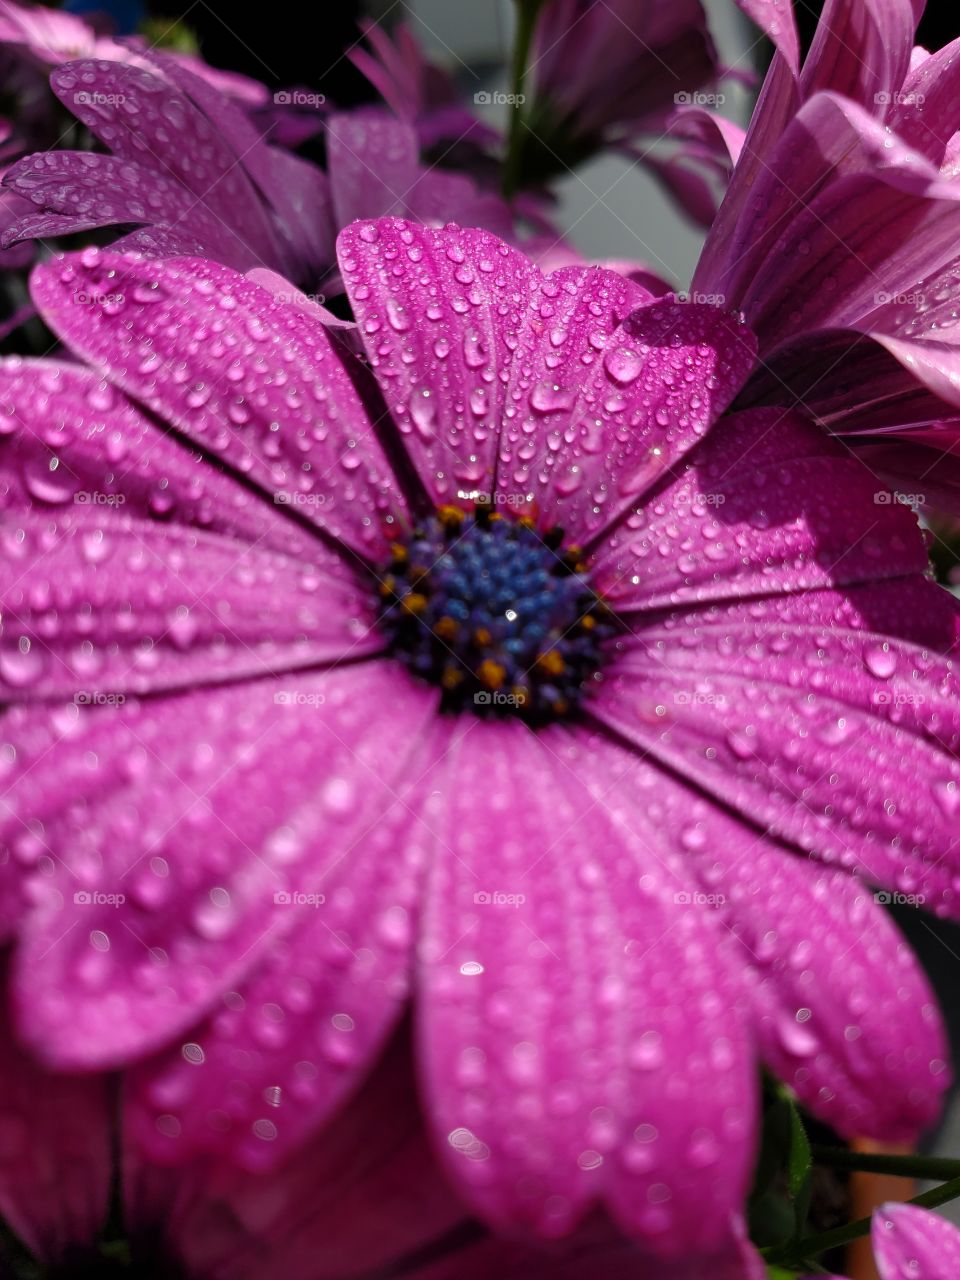 water droplets or dew on a flower